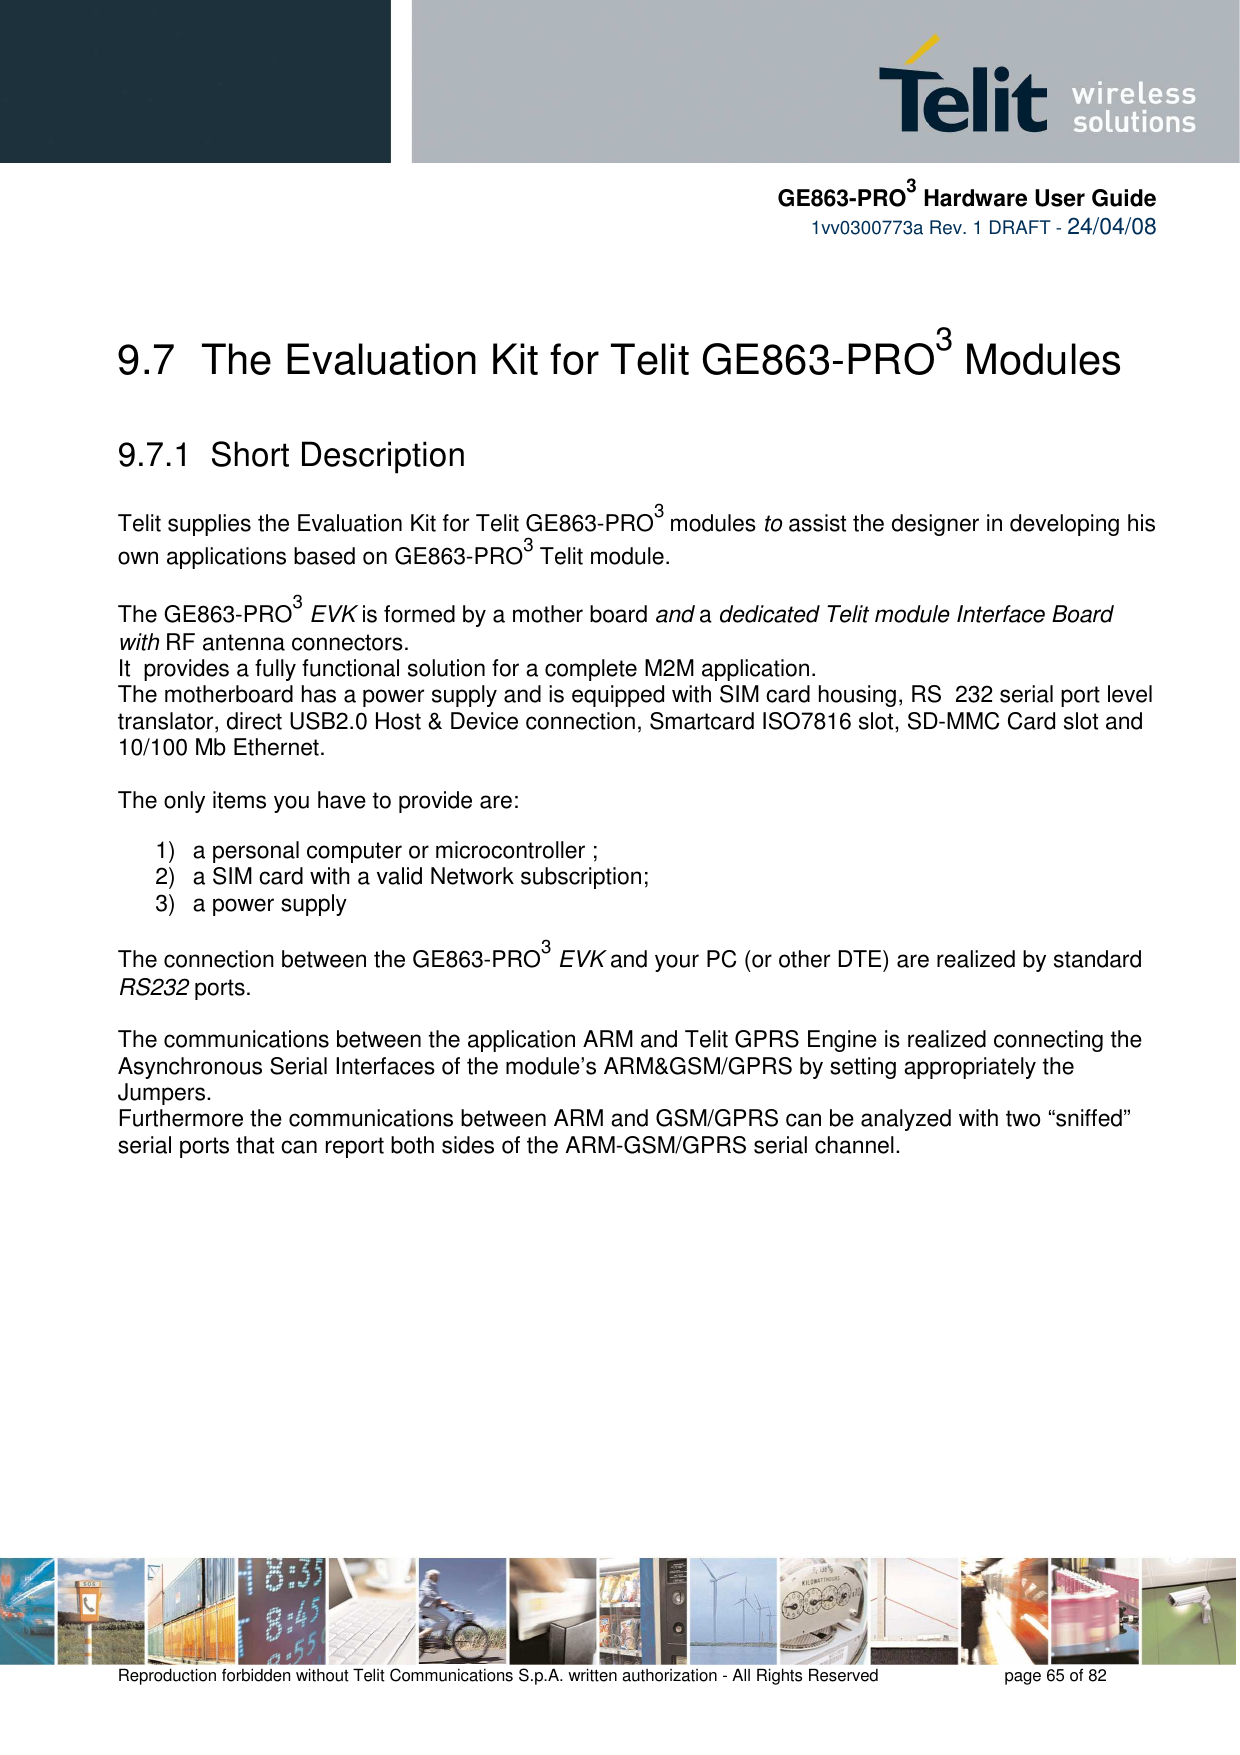     GE863-PRO3 Hardware User Guide  1vv0300773a Rev. 1 DRAFT - 24/04/08    Reproduction forbidden without Telit Communications S.p.A. written authorization - All Rights Reserved    page 65 of 82   9.7  The Evaluation Kit for Telit GE863-PRO3 Modules    9.7.1  Short Description   Telit supplies the Evaluation Kit for Telit GE863-PRO3 modules to assist the designer in developing his own applications based on GE863-PRO3 Telit module.   The GE863-PRO3 EVK is formed by a mother board and a dedicated Telit module Interface Board with RF antenna connectors.  It  provides a fully functional solution for a complete M2M application. The motherboard has a power supply and is equipped with SIM card housing, RS  232 serial port level translator, direct USB2.0 Host &amp; Device connection, Smartcard ISO7816 slot, SD-MMC Card slot and 10/100 Mb Ethernet.   The only items you have to provide are:  1)  a personal computer or microcontroller ; 2)  a SIM card with a valid Network subscription; 3)  a power supply  The connection between the GE863-PRO3 EVK and your PC (or other DTE) are realized by standard RS232 ports.  The communications between the application ARM and Telit GPRS Engine is realized connecting the Asynchronous Serial Interfaces of the module’s ARM&amp;GSM/GPRS by setting appropriately the Jumpers. Furthermore the communications between ARM and GSM/GPRS can be analyzed with two “sniffed” serial ports that can report both sides of the ARM-GSM/GPRS serial channel. 